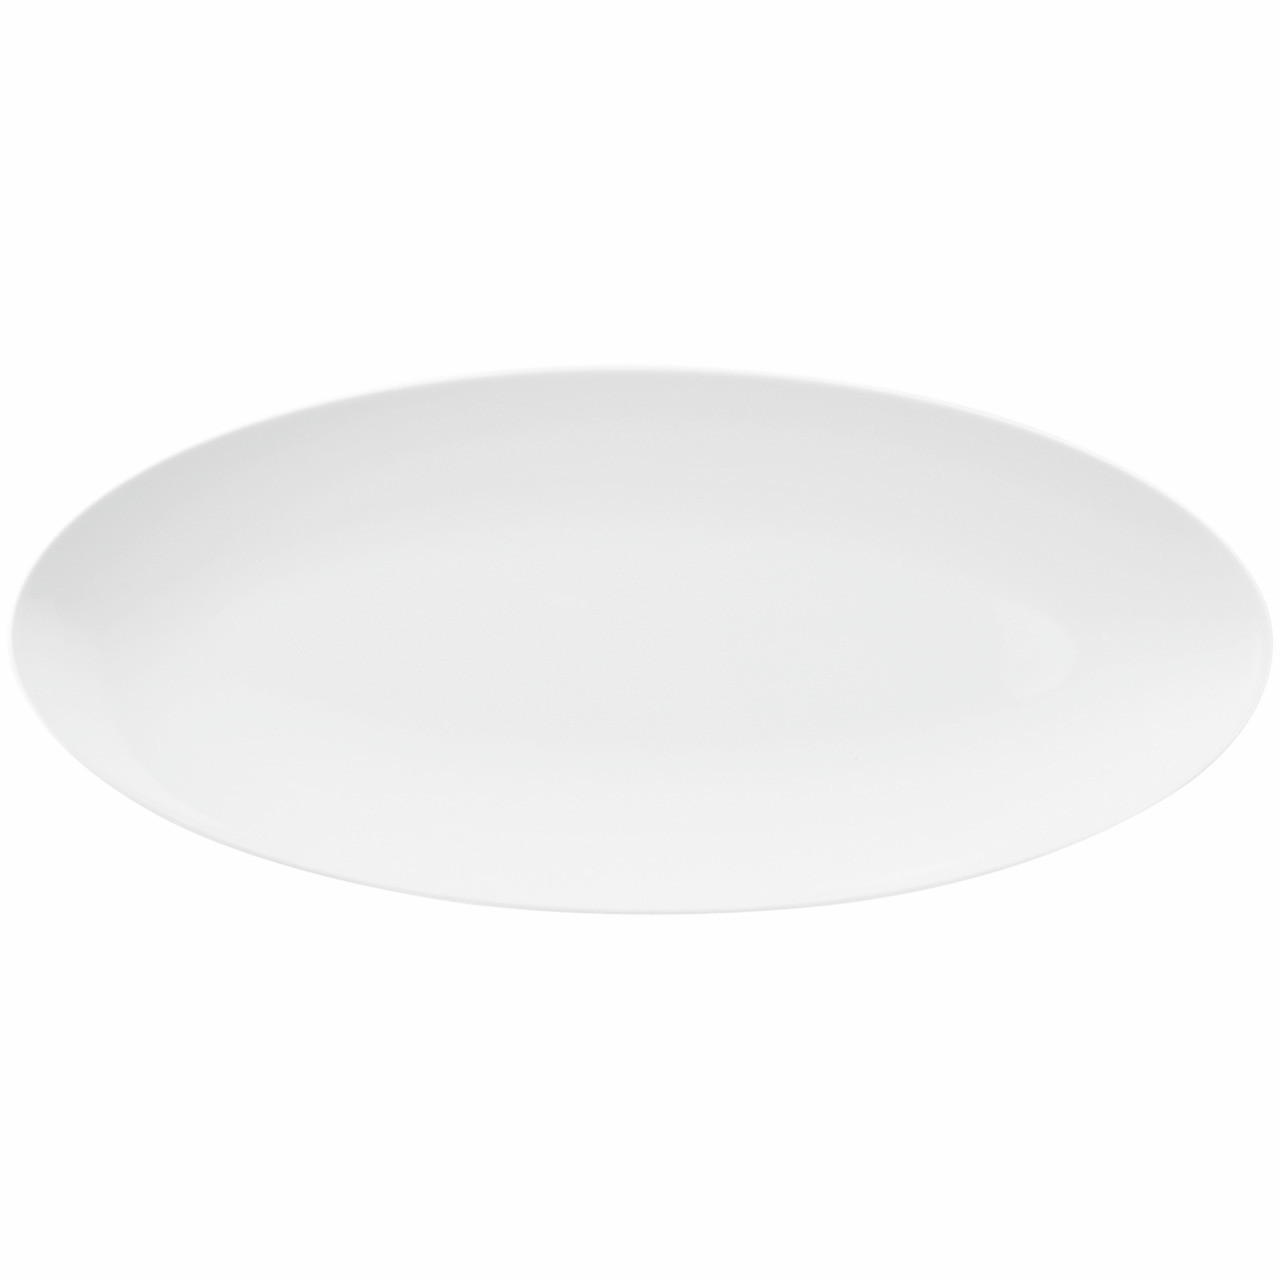 Coup Fine Dining, Coupplatte oval 405 x 191 mm weiß uni